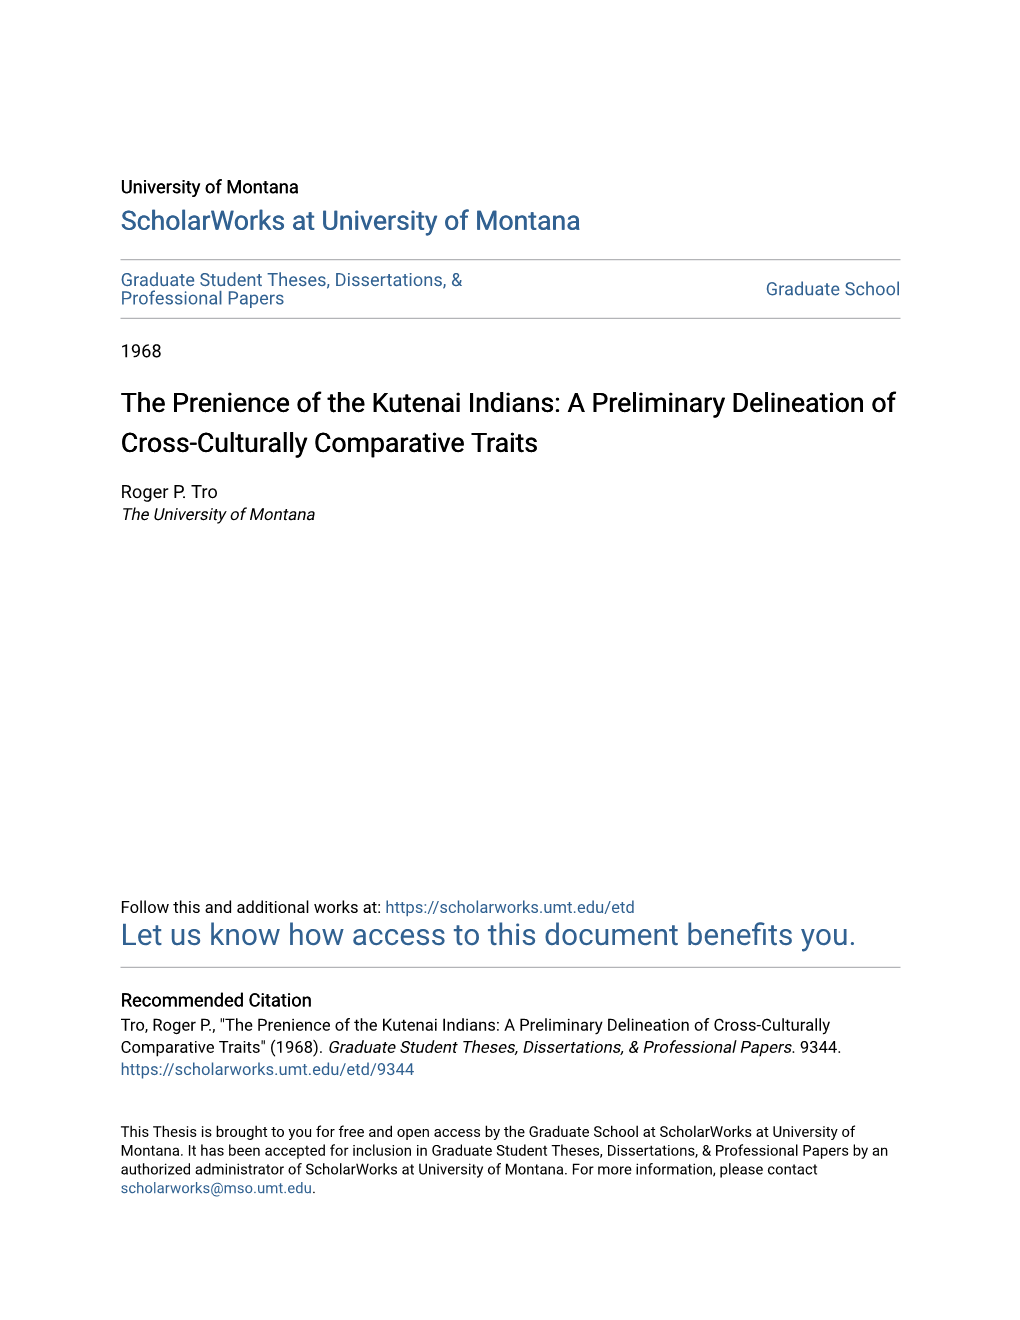 The Prenience of the Kutenai Indians: a Preliminary Delineation of Cross-Culturally Comparative Traits